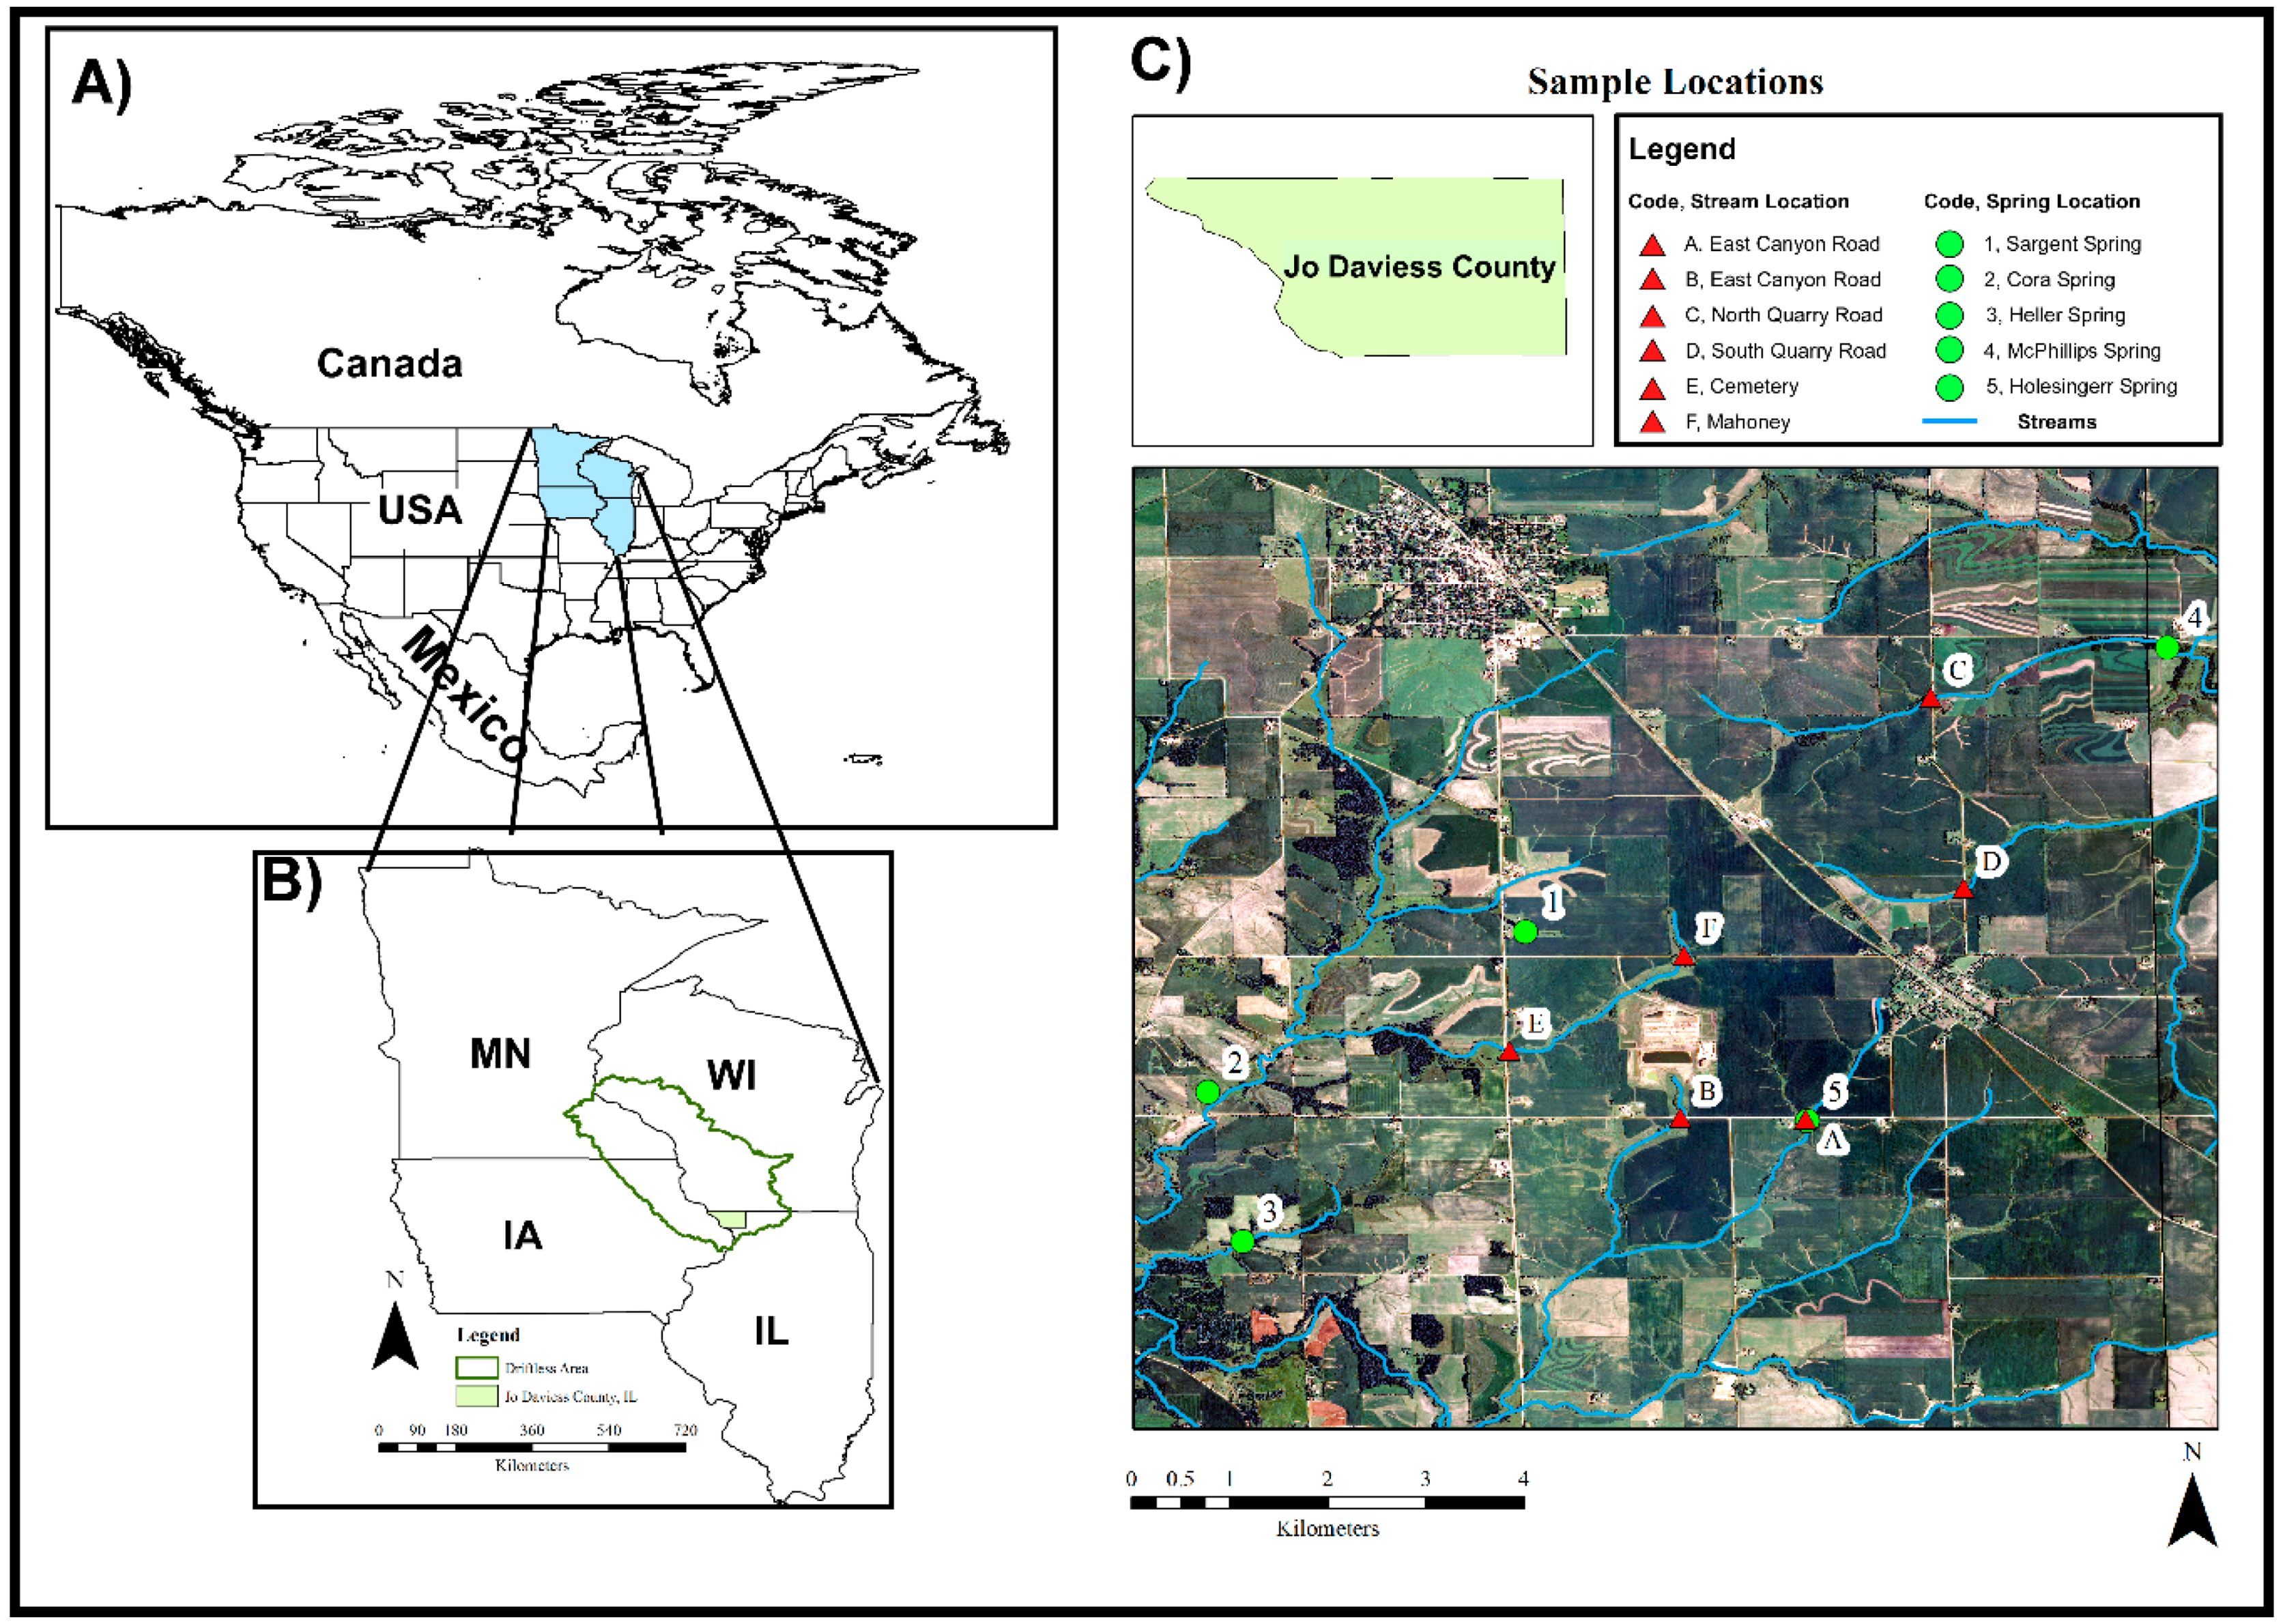 Geosciences Free Full Text Differentiation Of Surface Water And Groundwater In A Karst System Using Anthropogenic Signatures